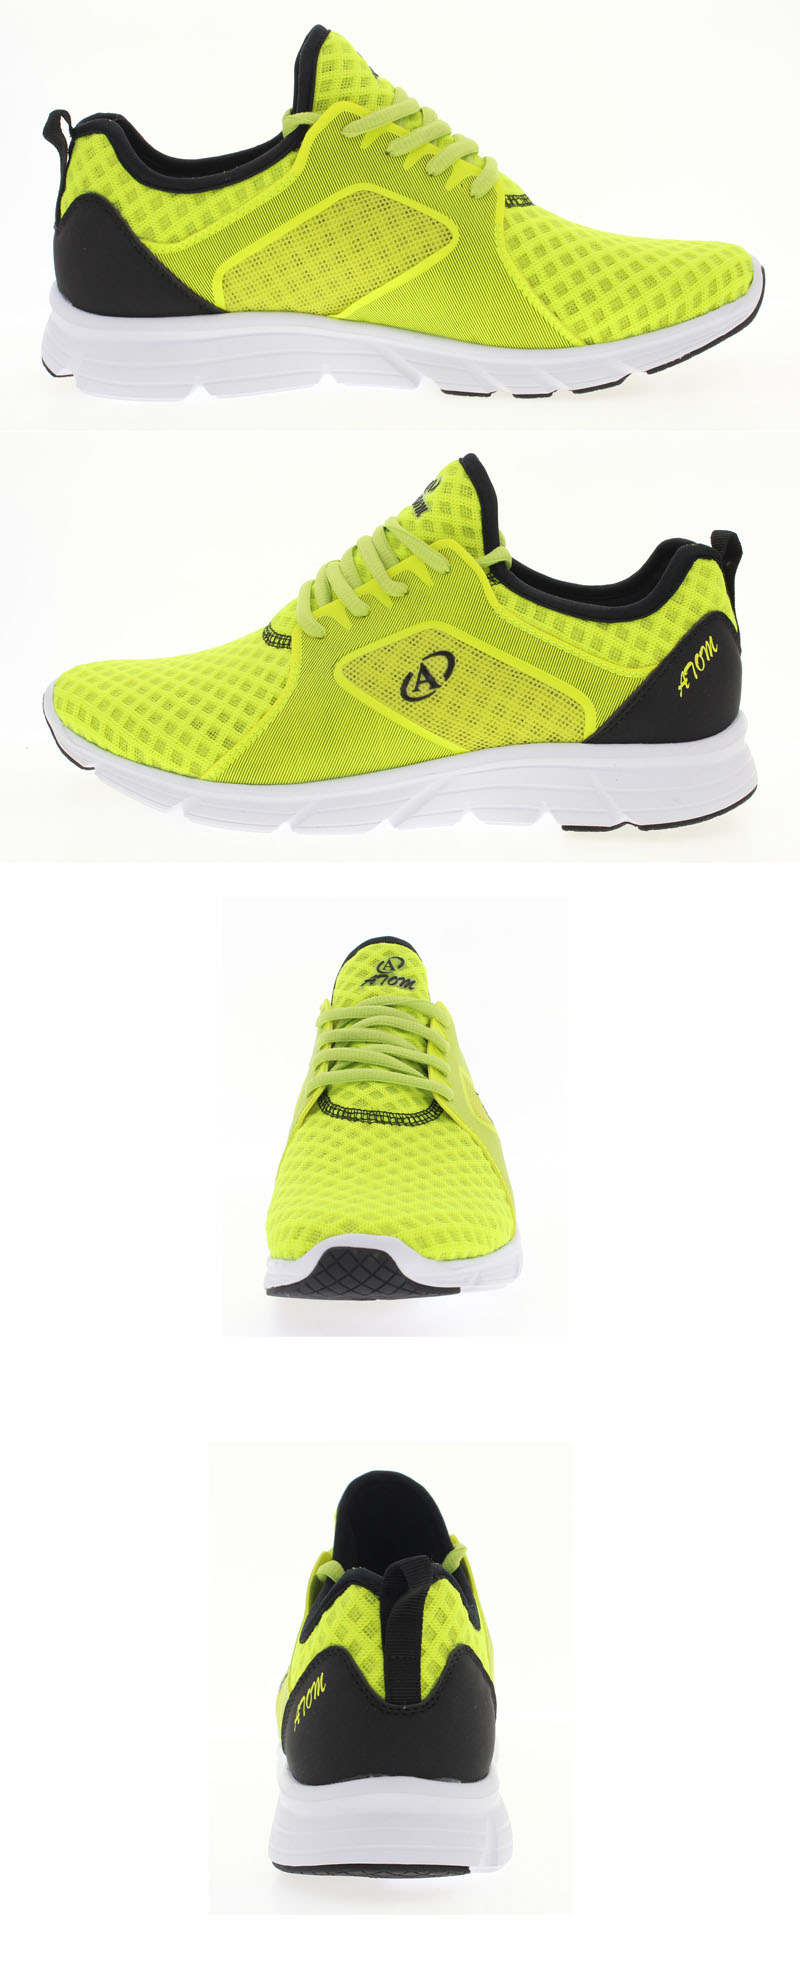 Neon yellow with Black sheos